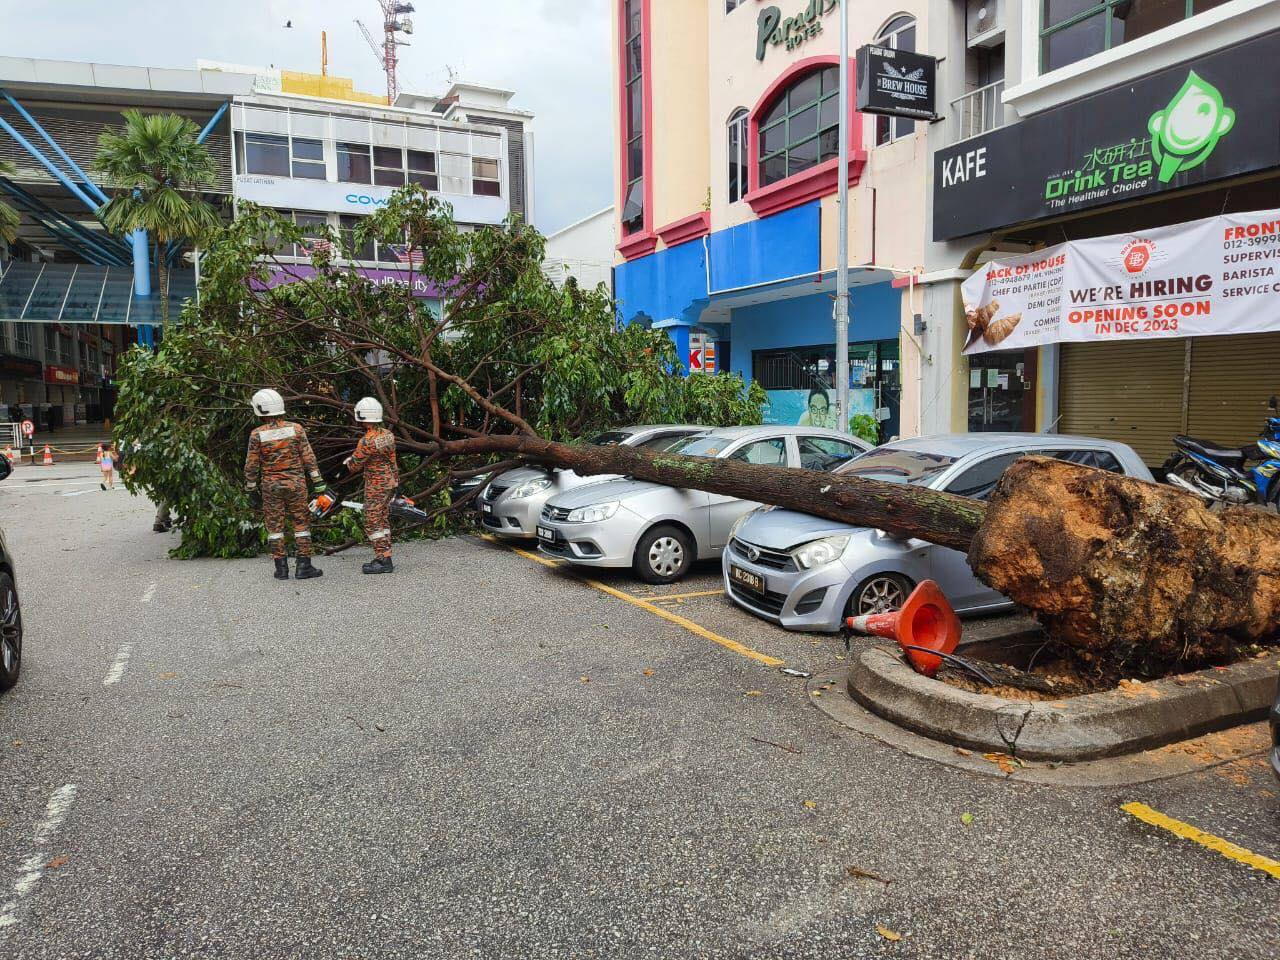 Firefighters removing the fallen tree on the car